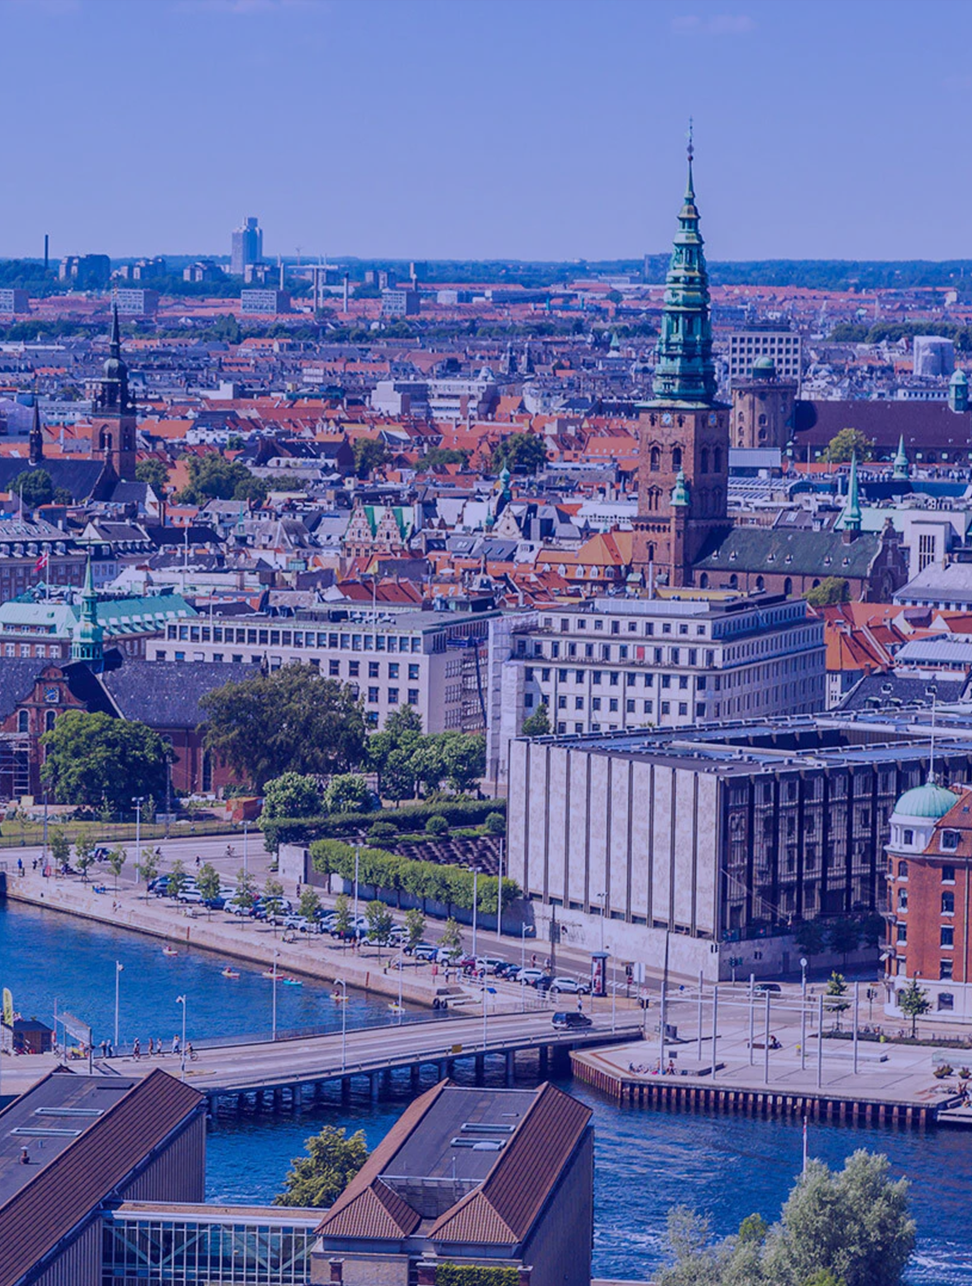 A new centralised website, unified branding, and increased service: JAKALA helps the City of Copenhagen with online communications